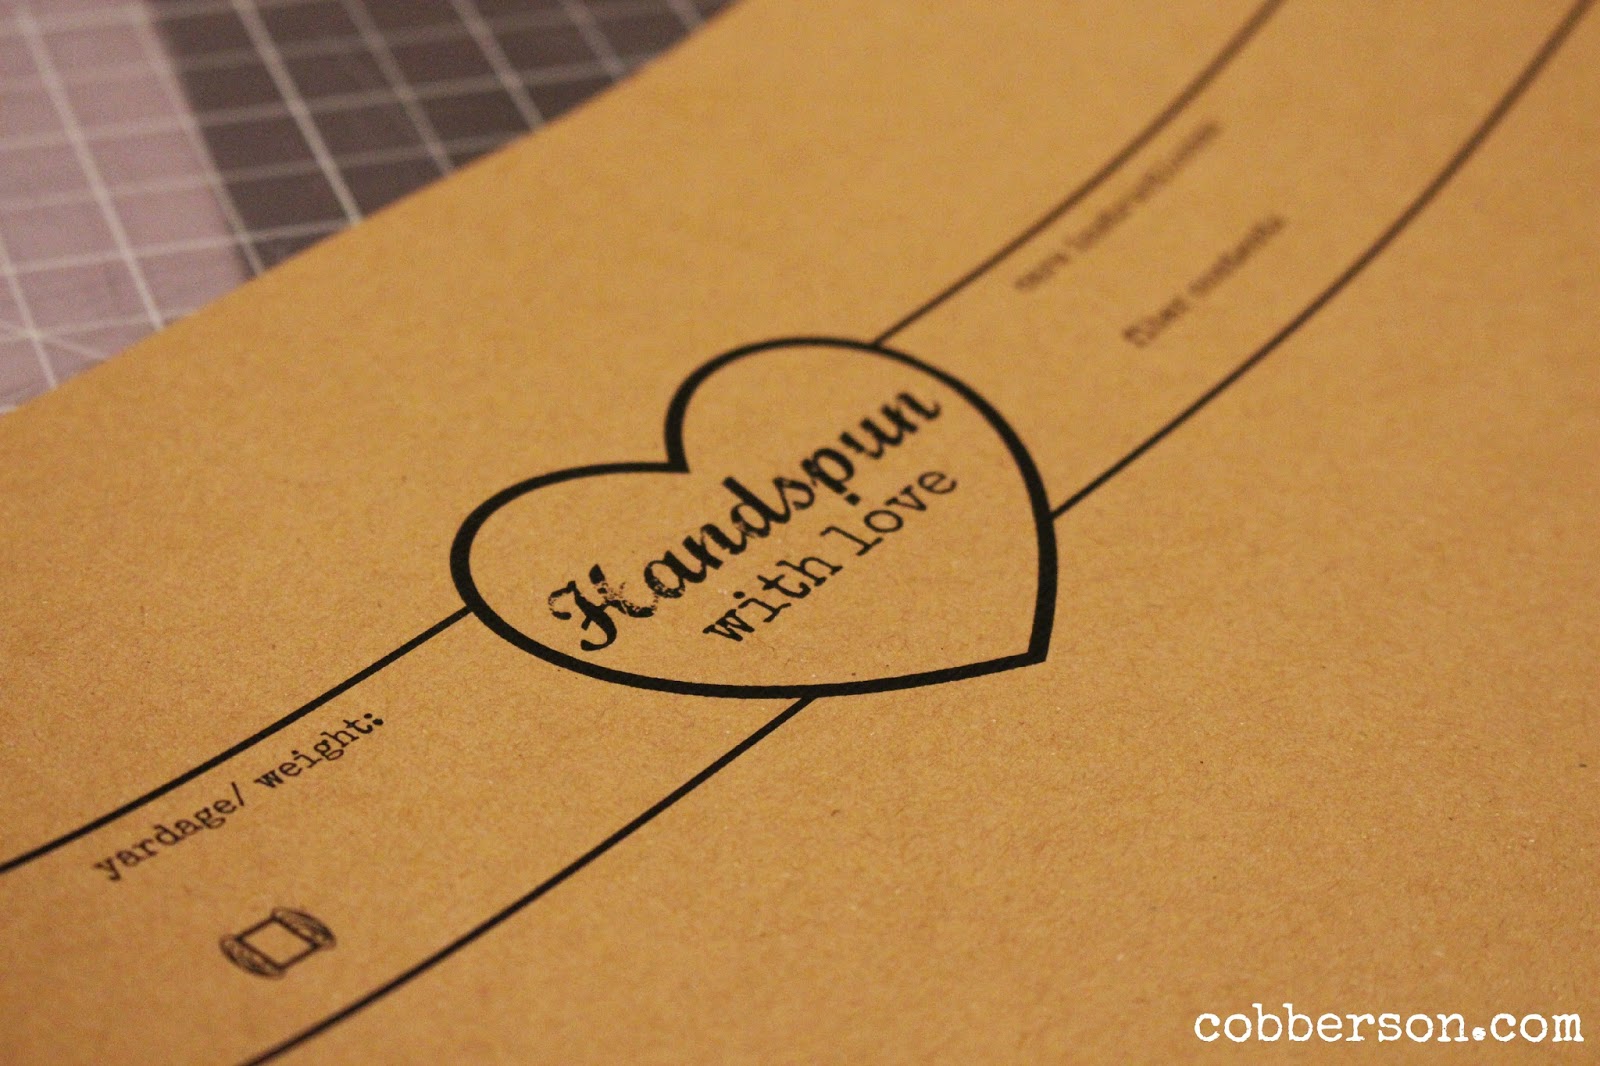 Cobberson & Co. Handspun with love free printable gift tag